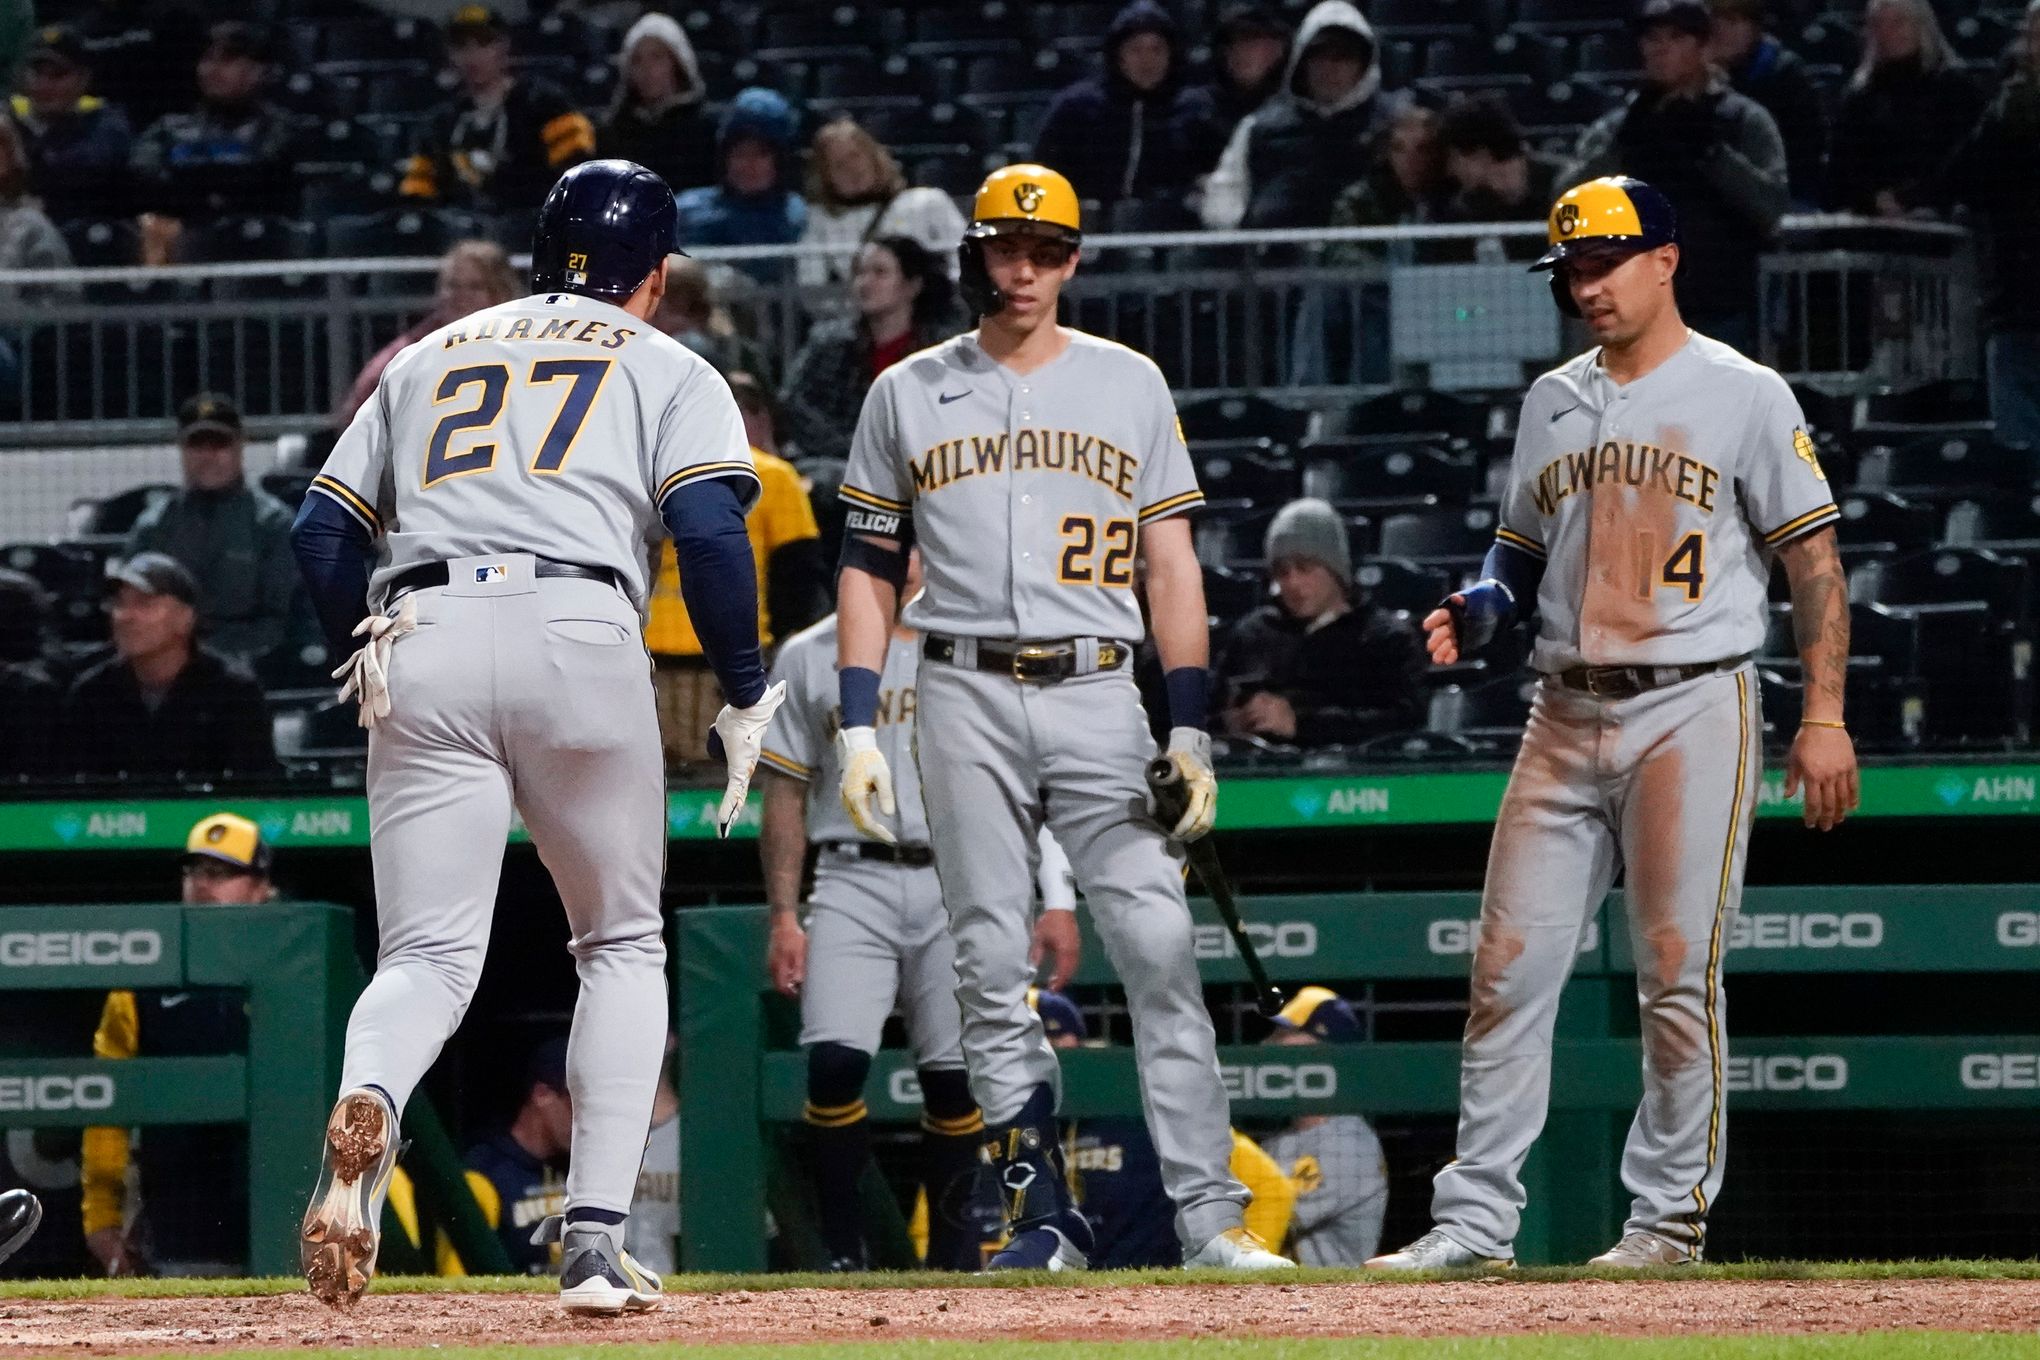 Willy Adames hits 2 homers, accounts for 7 RBIs as Brewers beat Pirates